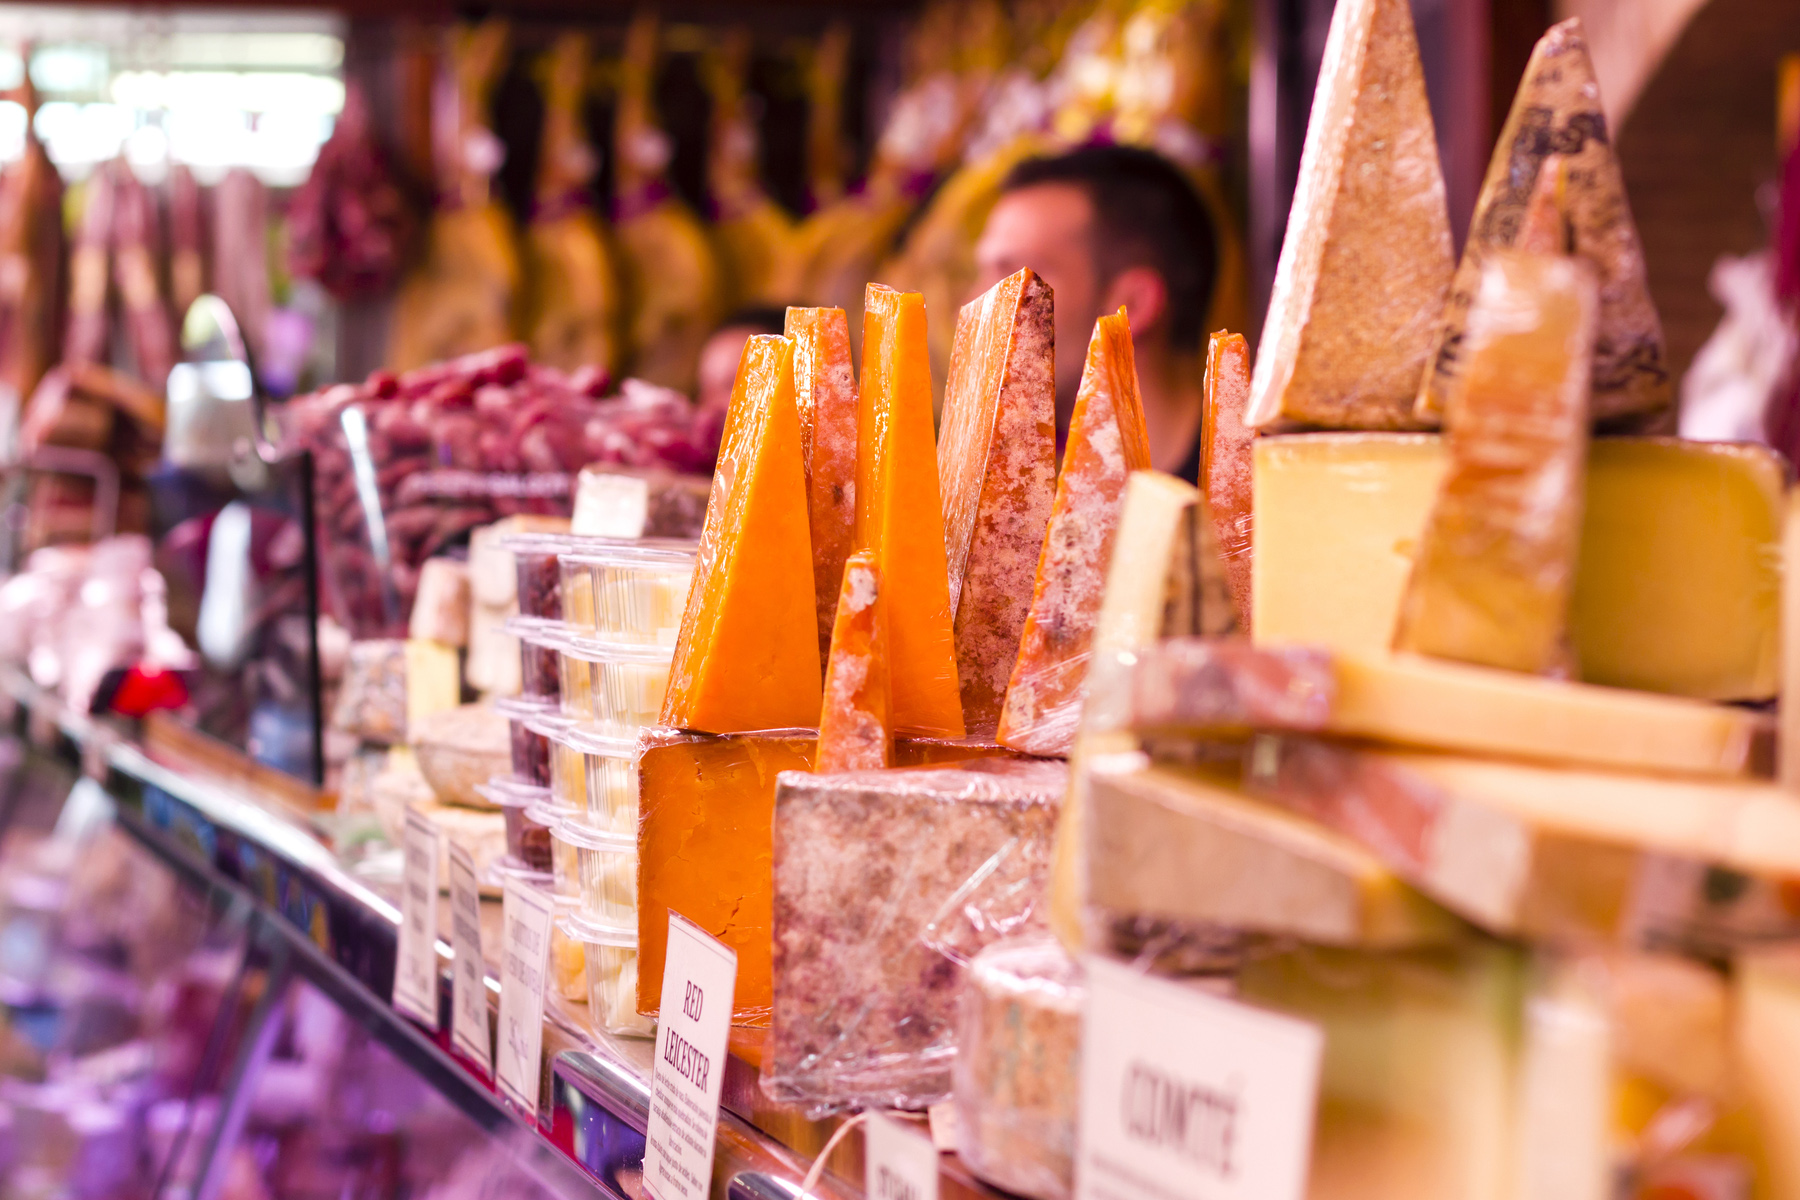 A cheese market stall in València, Spain